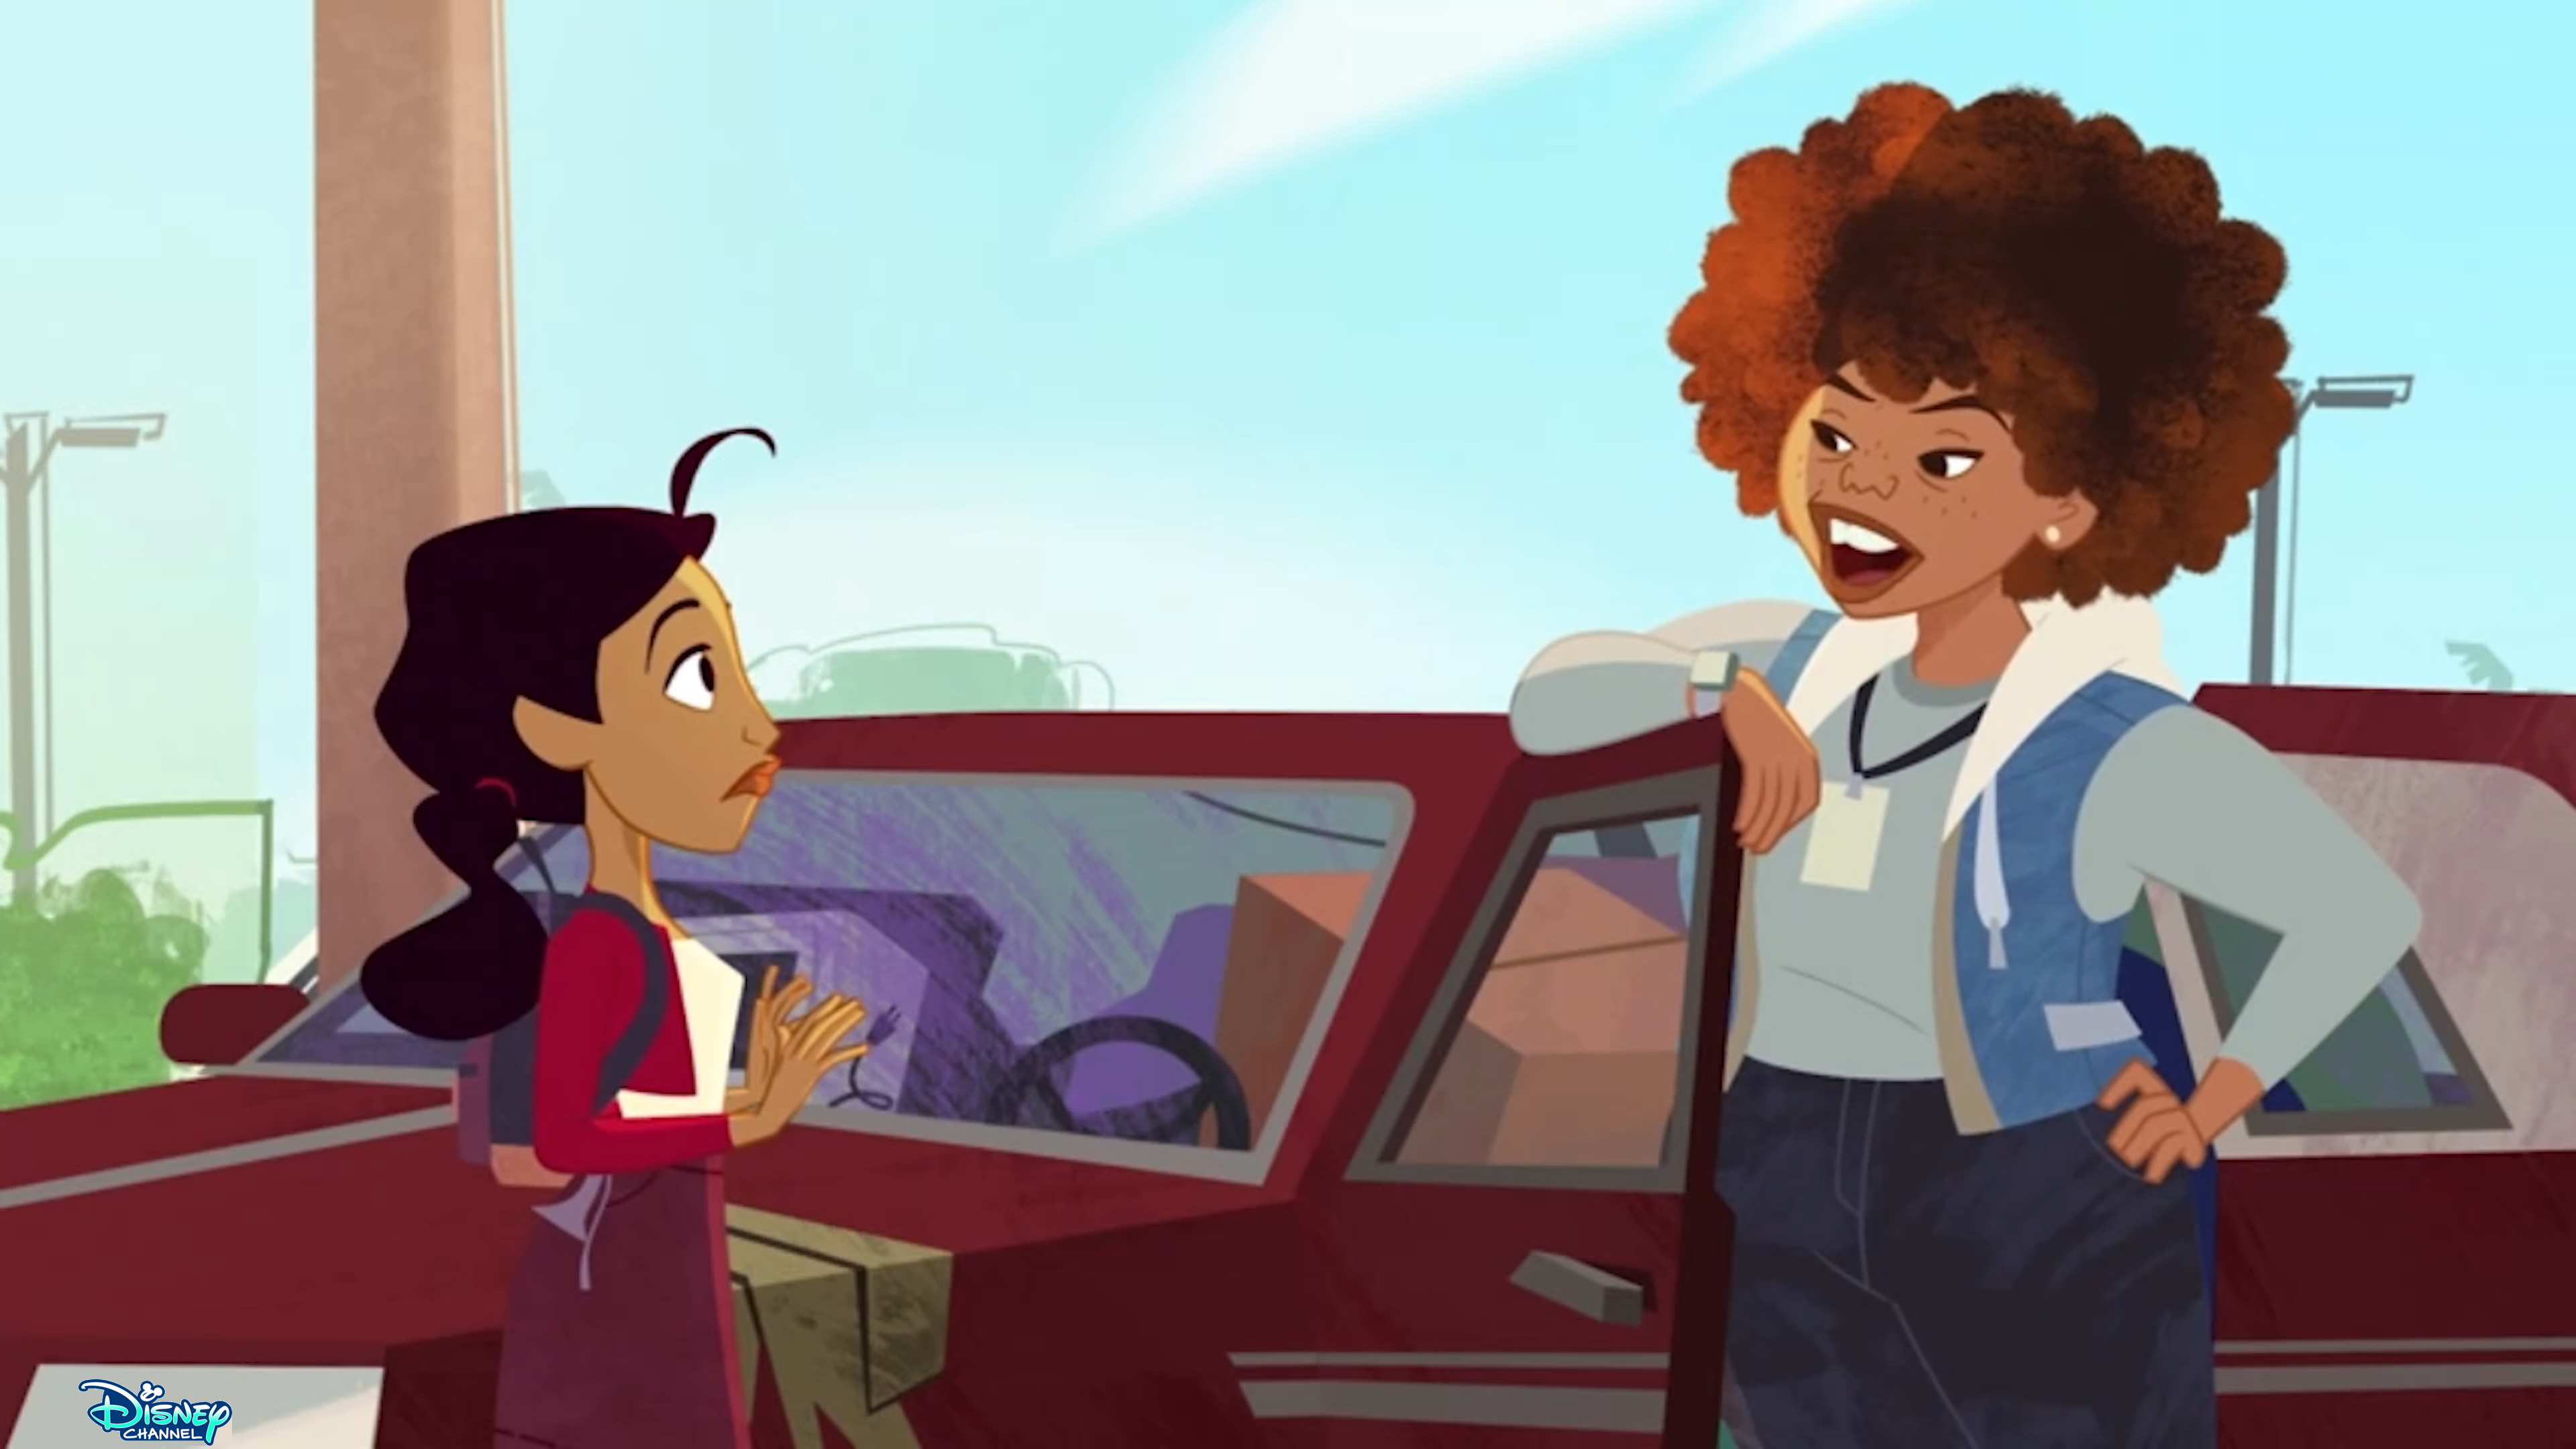  The Proud Family: Louder and Prouder - inicial School Promo disney Channel 1